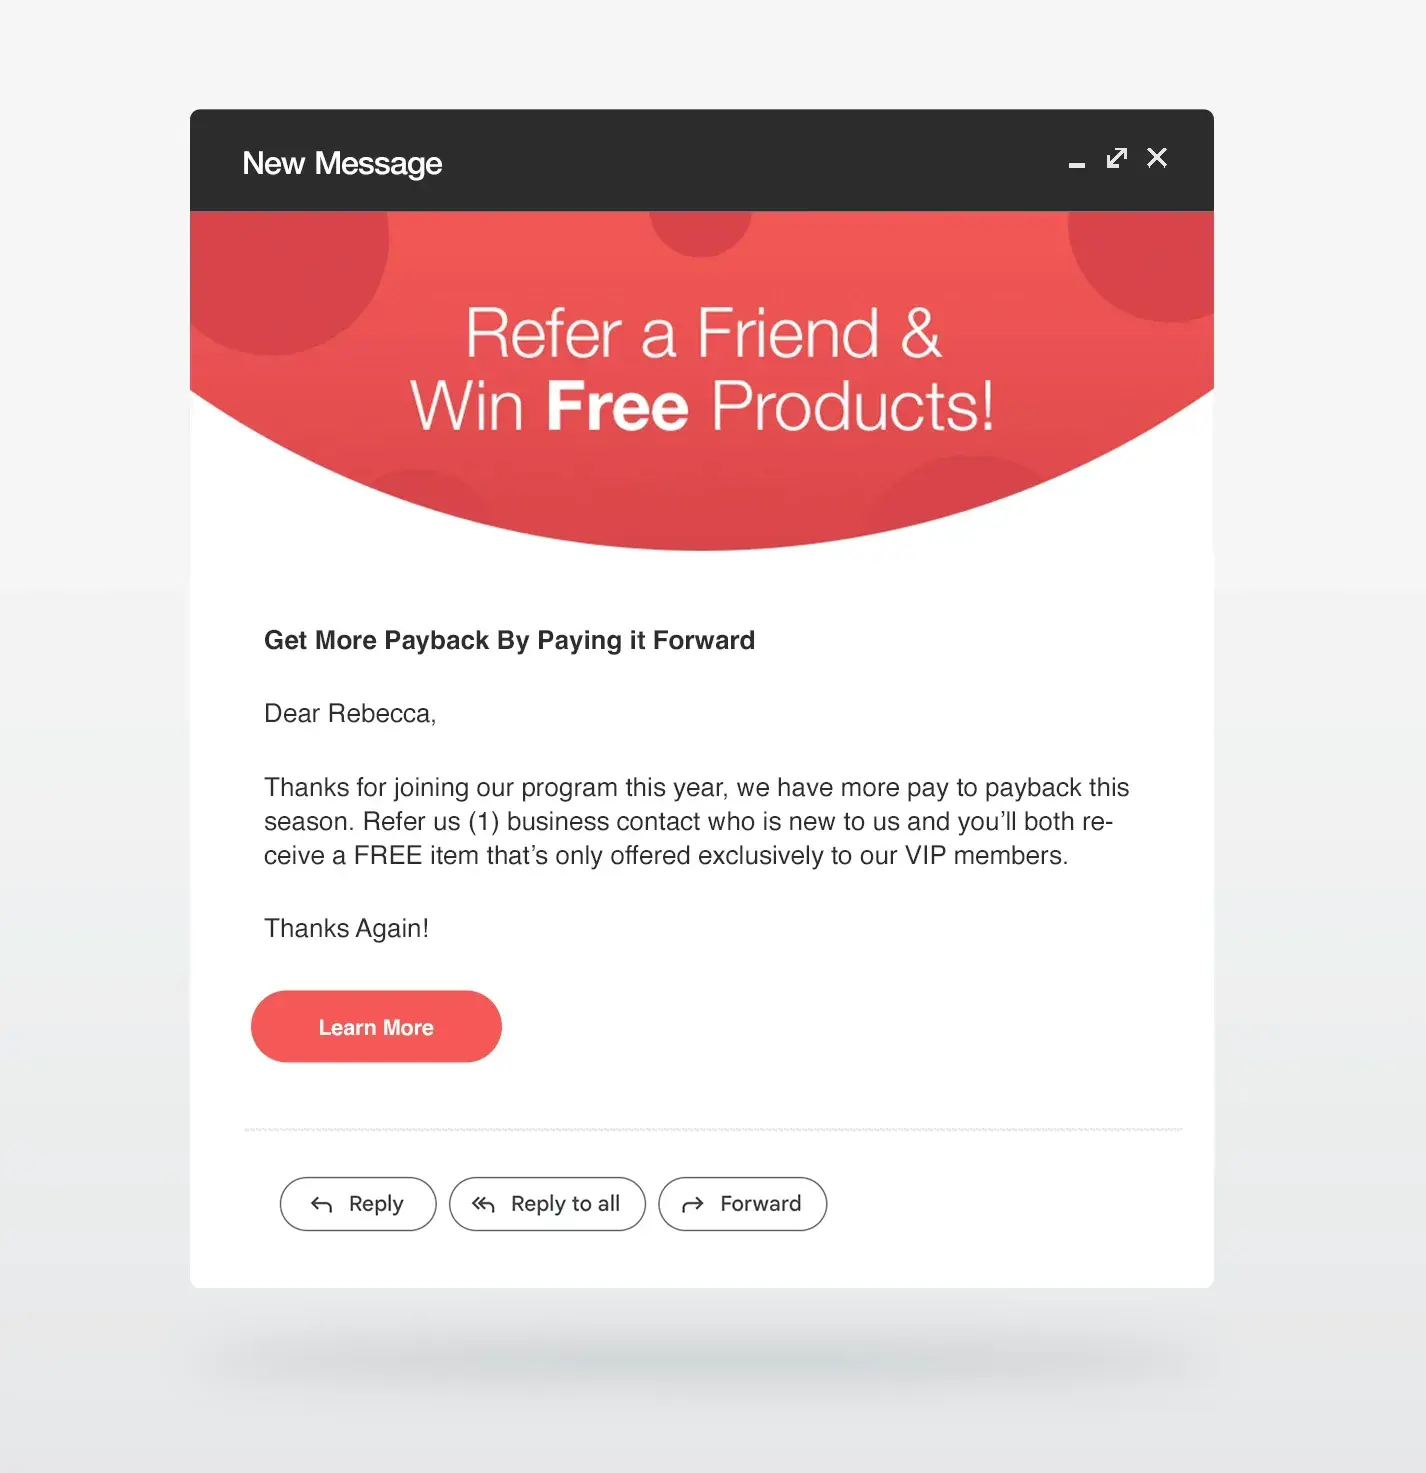 Refer a Friend Email